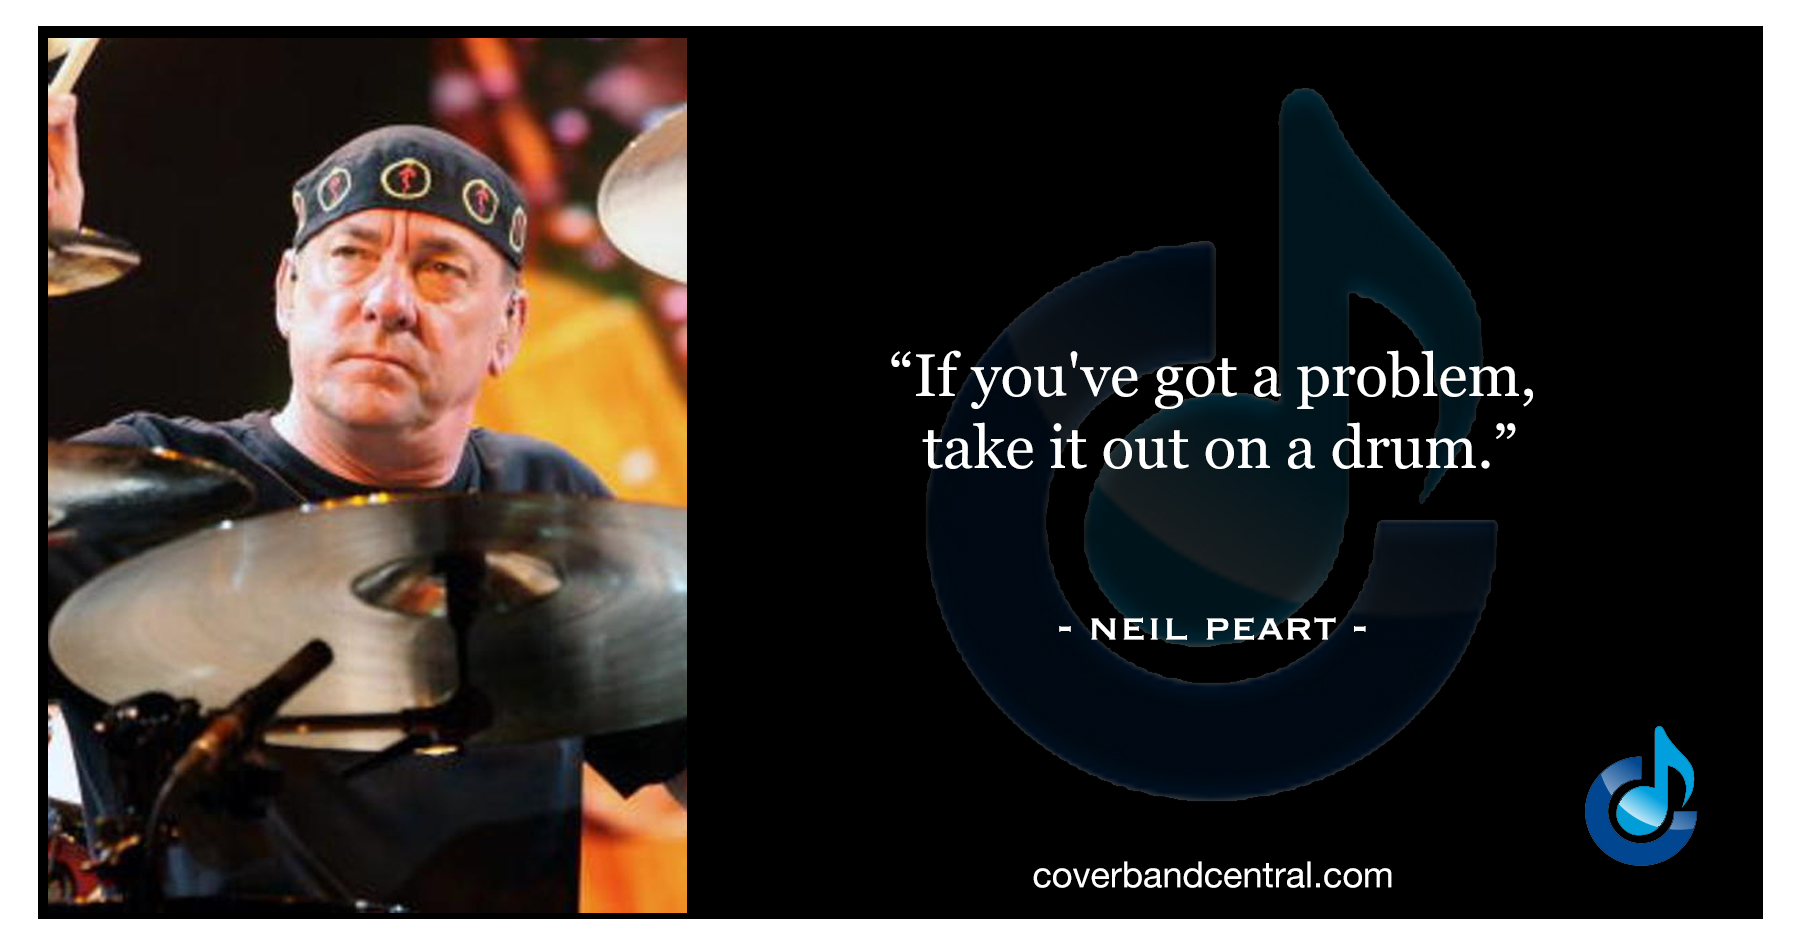 Neil Peart quote